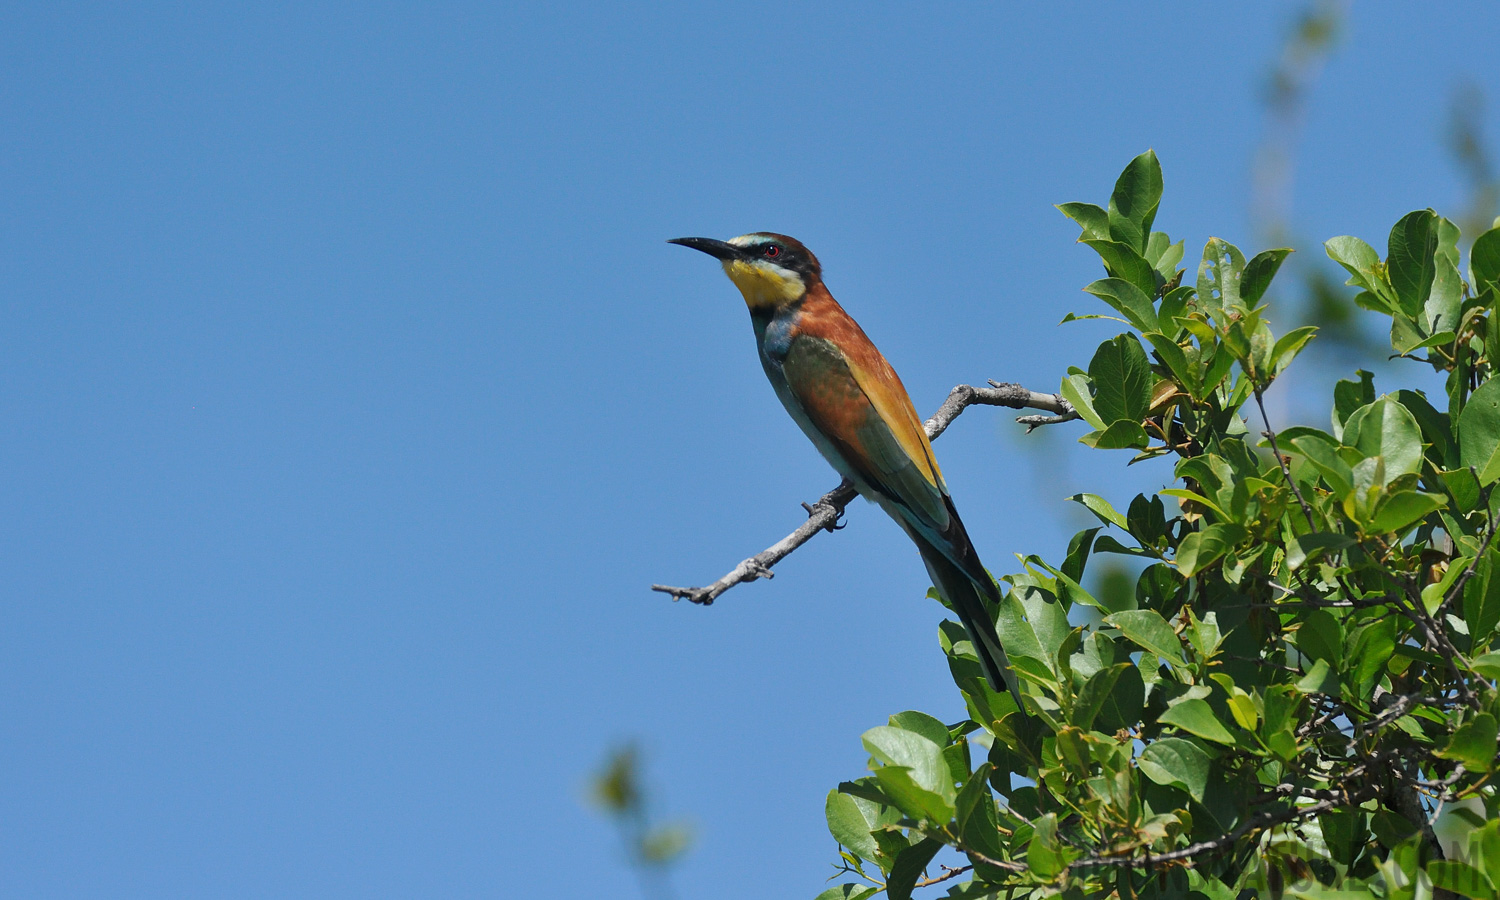 Merops apiaster [550 mm, 1/5000 sec at f / 8.0, ISO 1600]